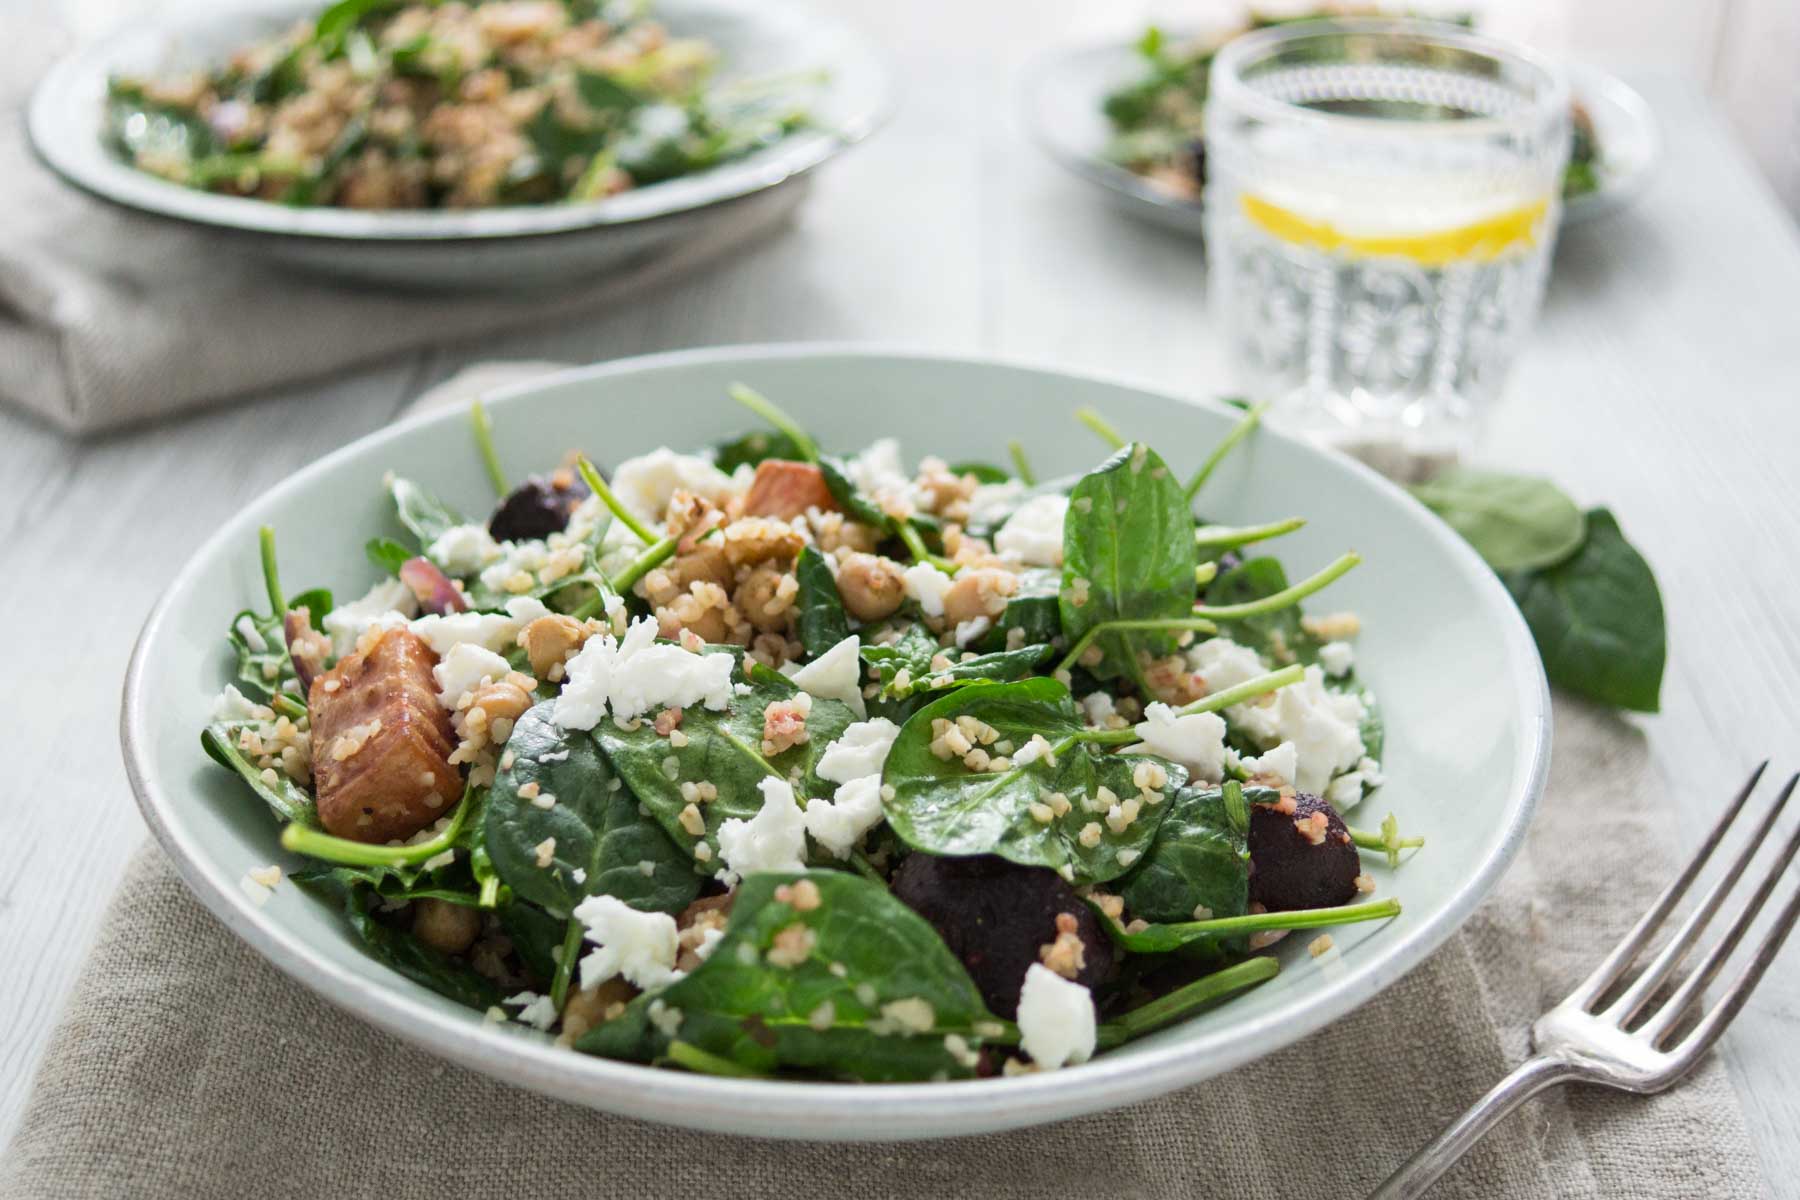 Spinach Salad with Beets, Chickpeas, Bulgur and Feta